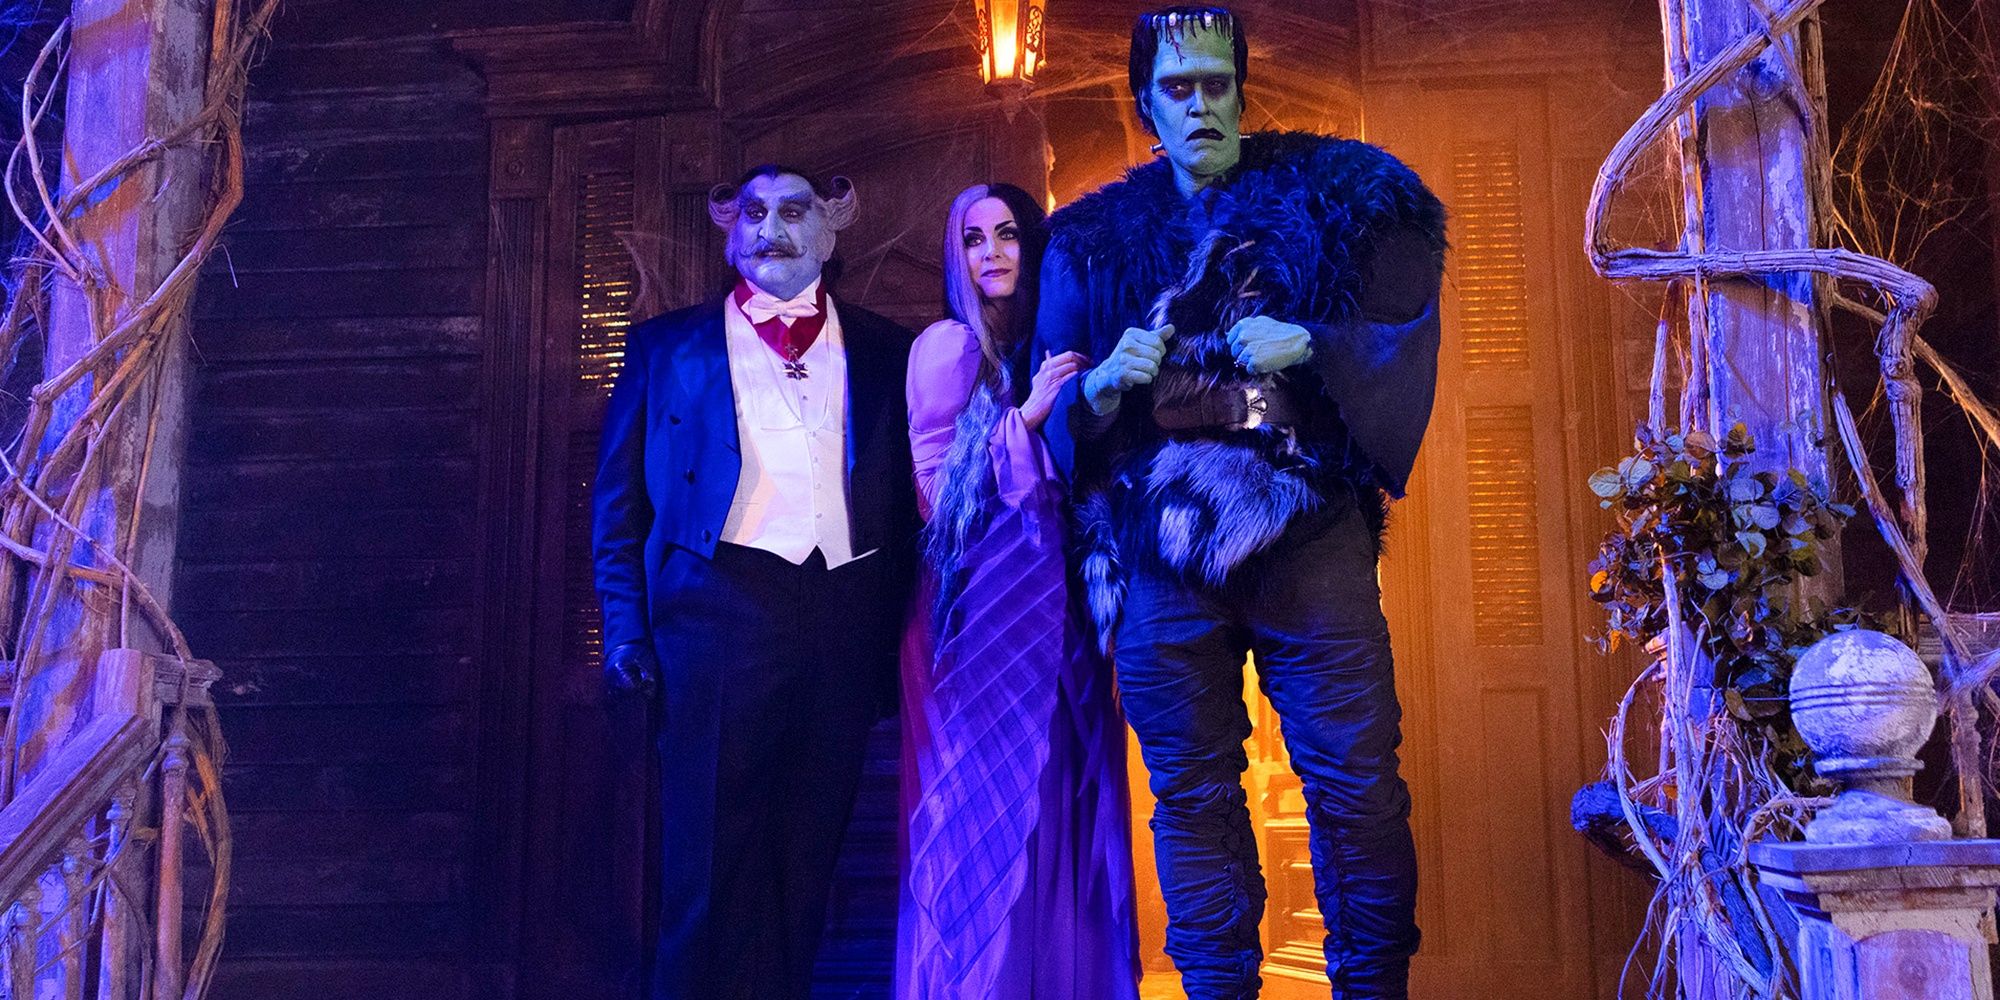 The titular Munsters in Rob Zombie's The Munsters